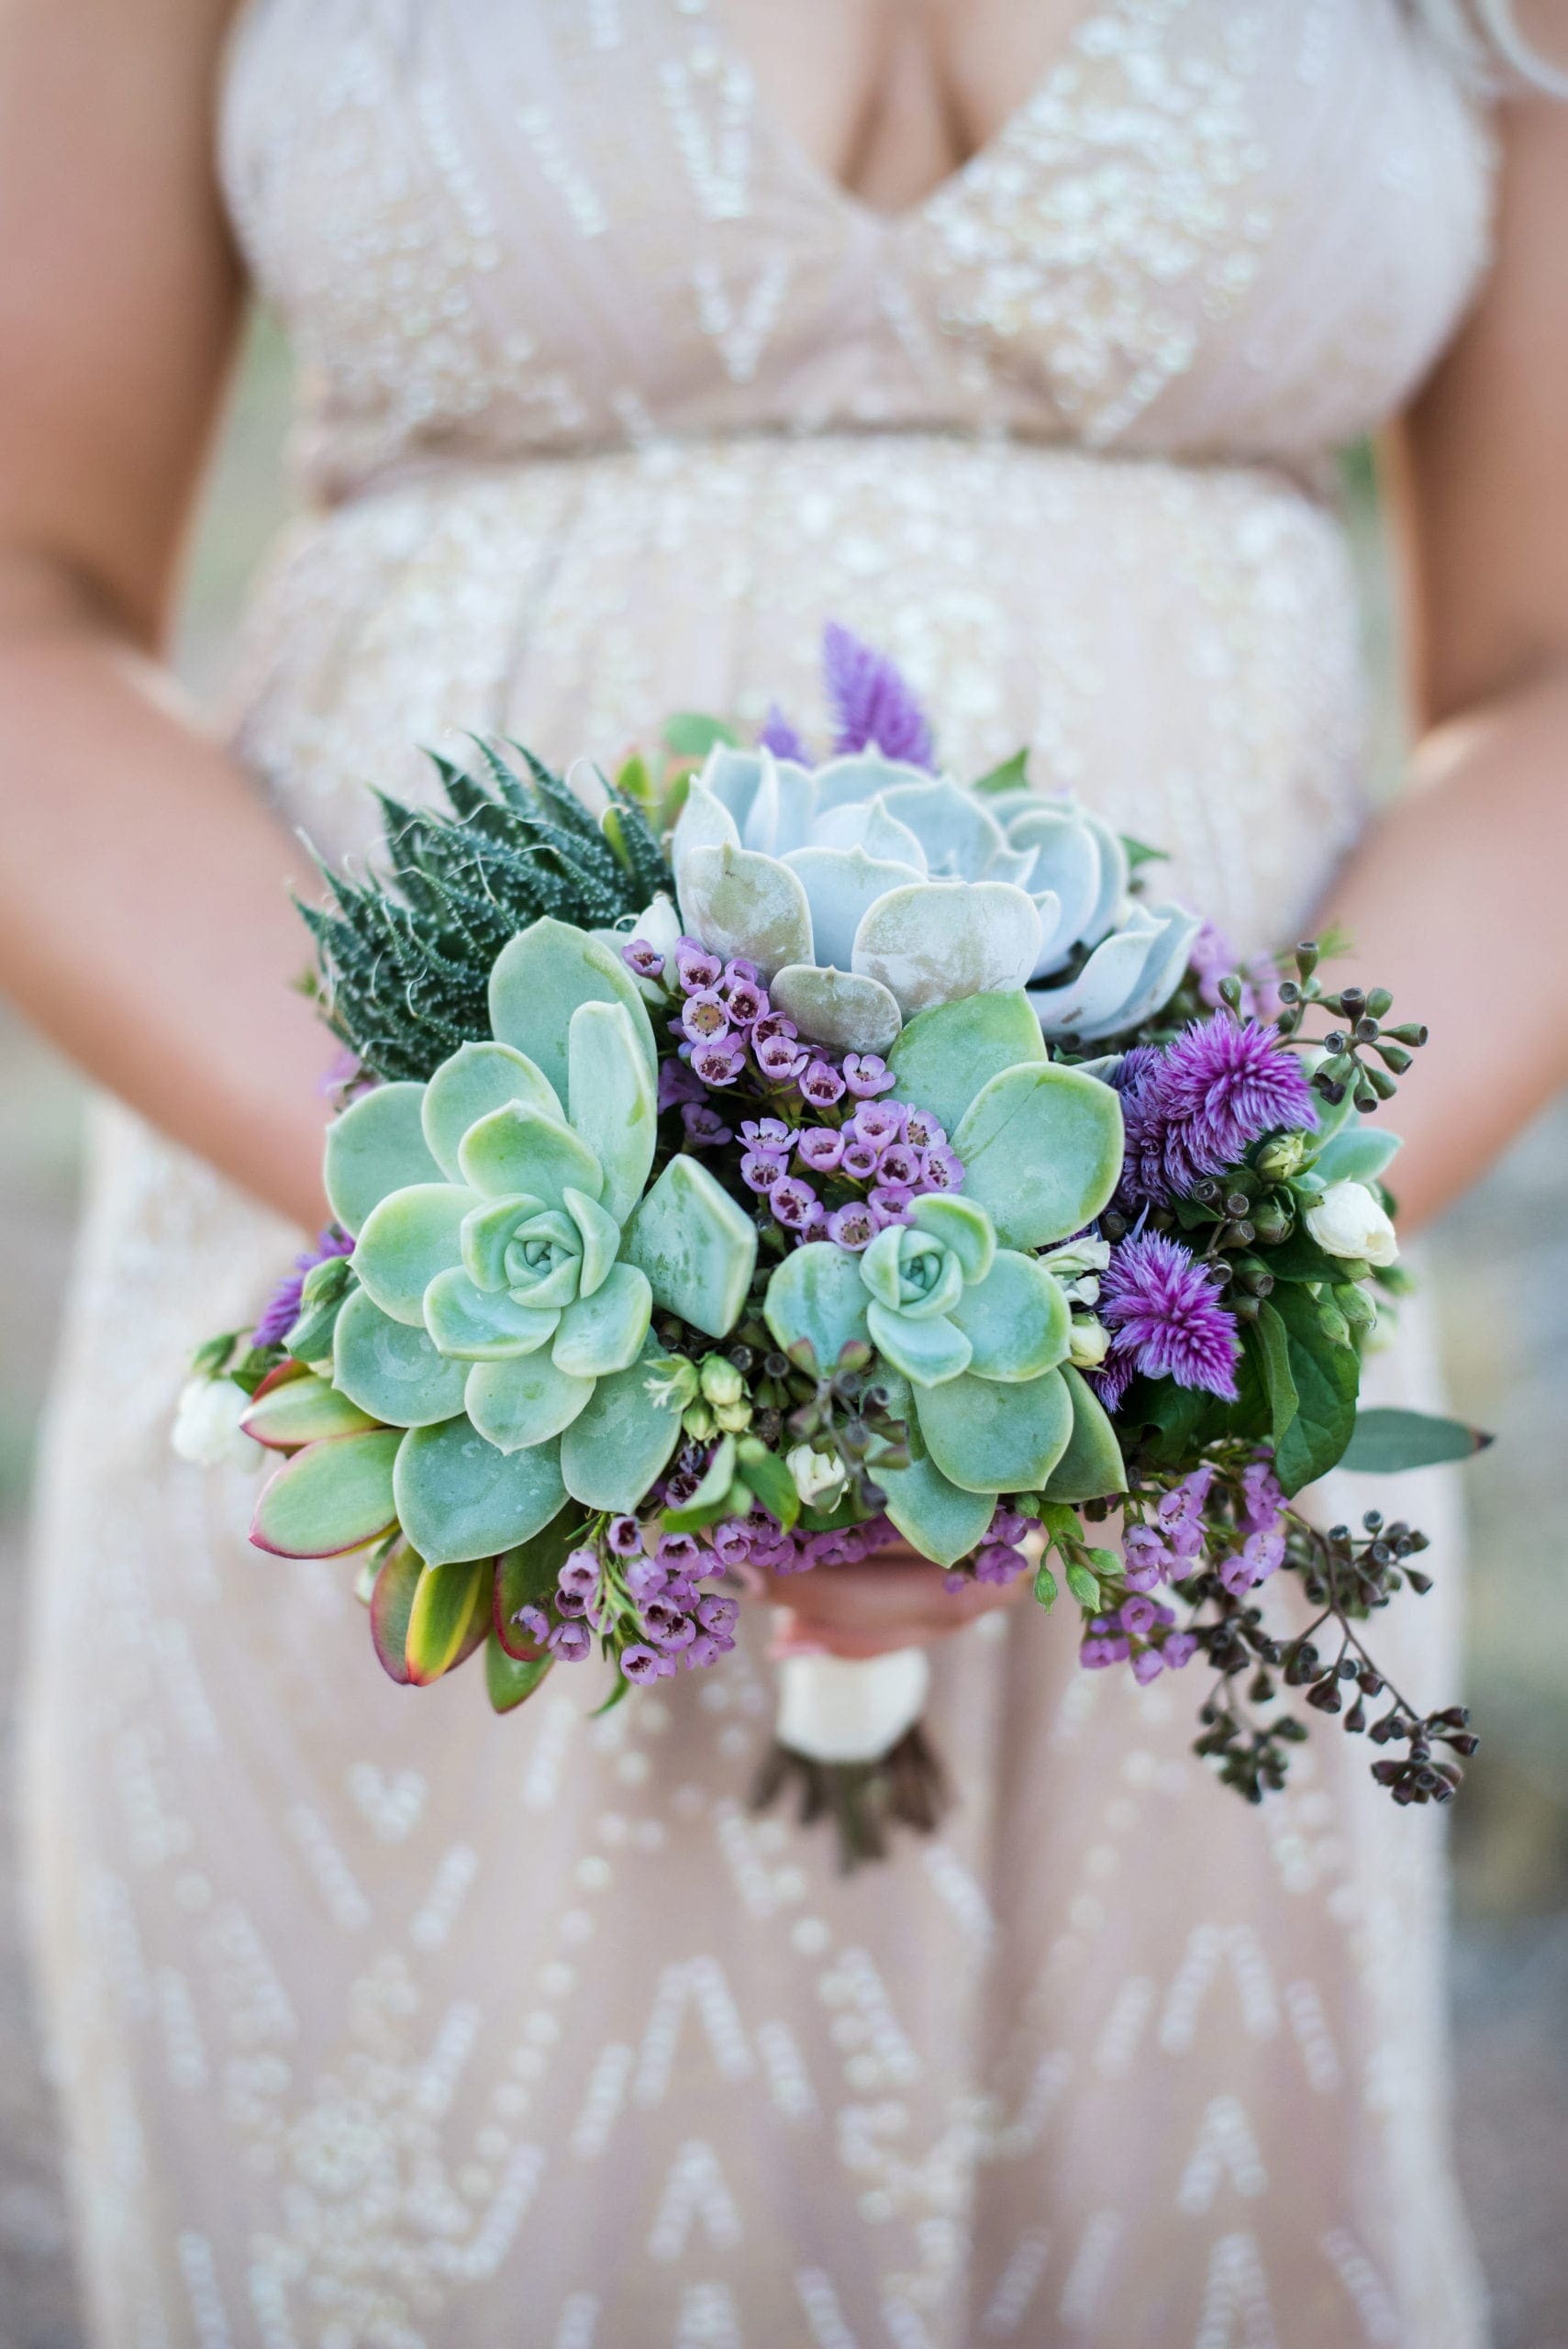 Bride in a white lace dress holding a green and purple wedding bouquet.